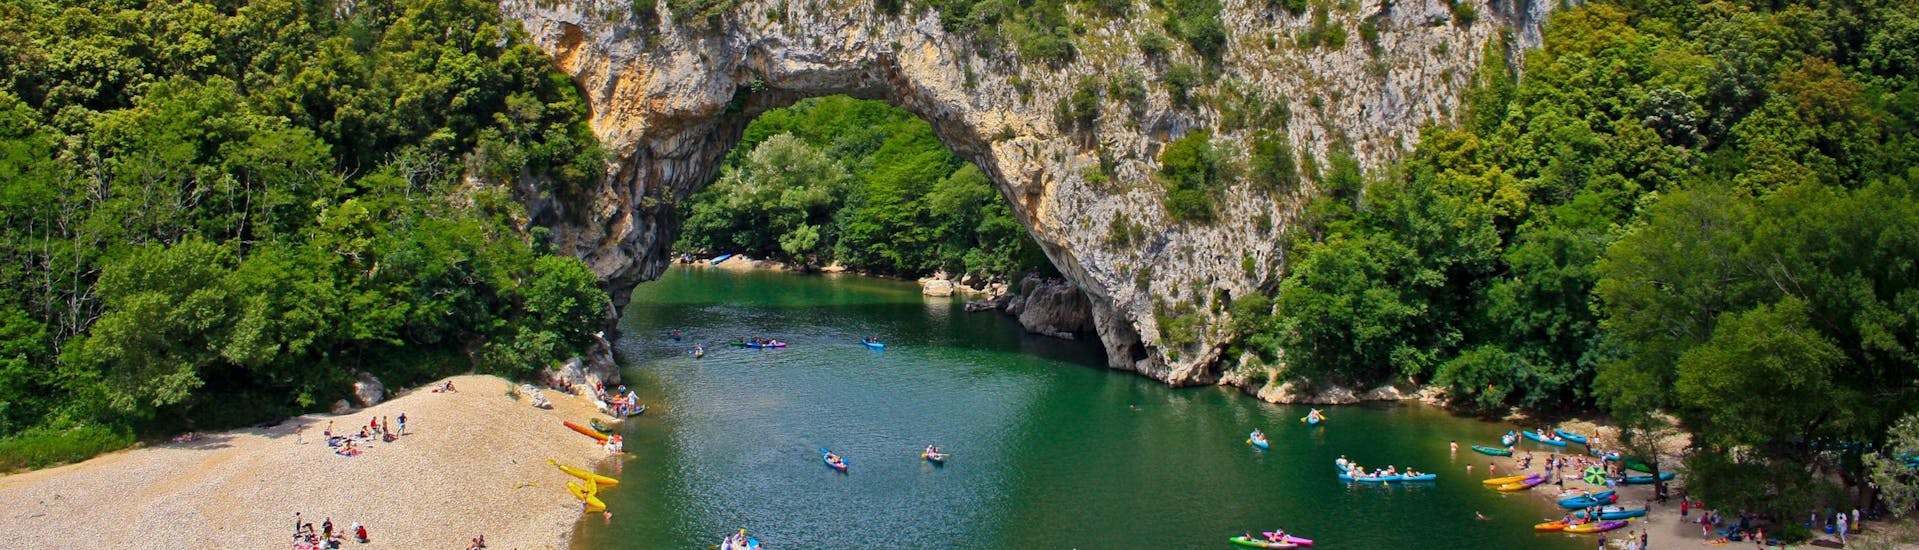 A mother and her two children are paddling across the water as they enjoy their kayak canoe in Gorges de l'Ardèche.